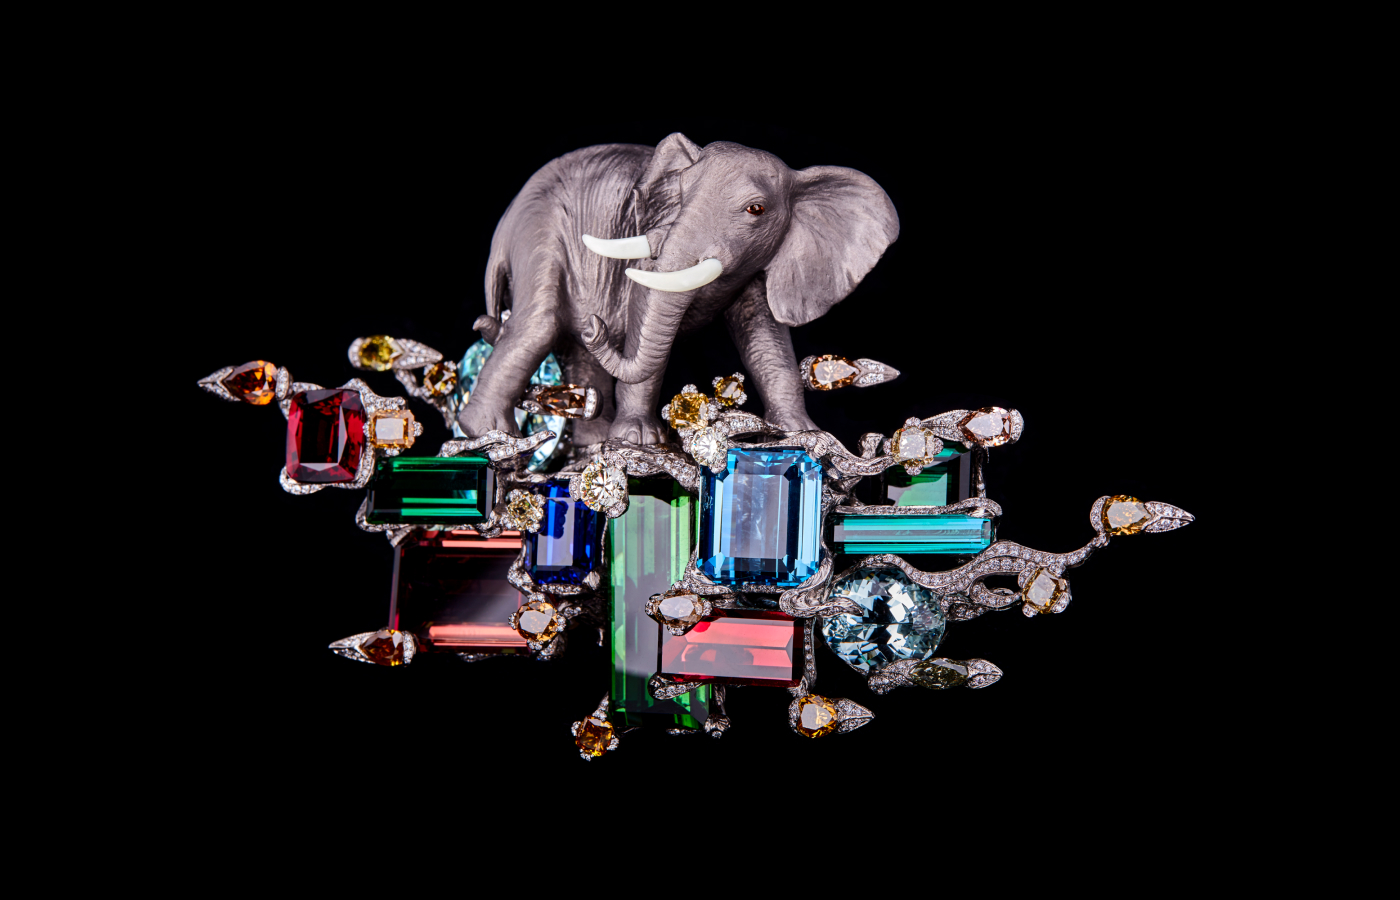 Wallace Chan The Beauty of Greatness brooch with a carved titanium elephant, green tourmaline, rubellite, aquamarine, tanzanite, fancy-coloured diamonds, colourless diamonds, obsidian, yellow sapphire and pearls in The Wallace Chan Porcelain and titanium